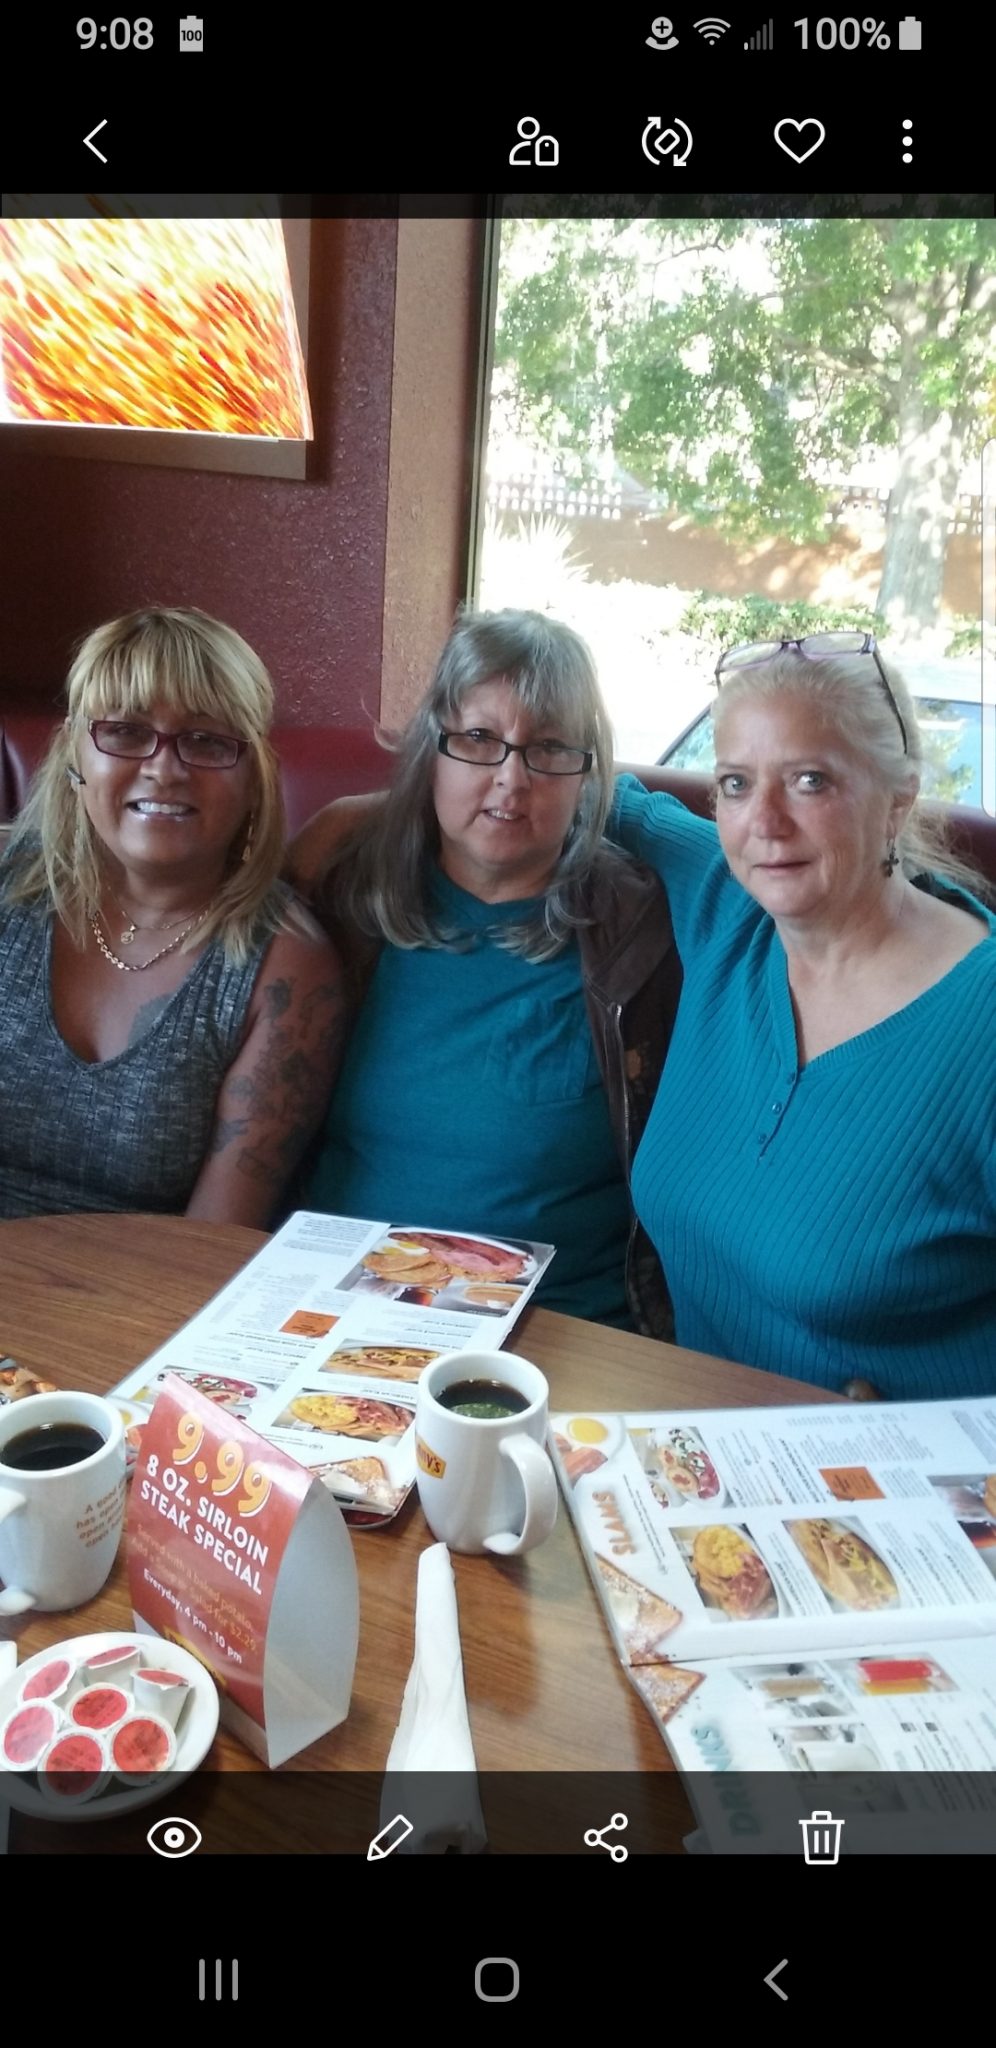 Birthday Breakfast at Denny's in may of 2017 with Jenny, Sandy and Cindy we sure had fun that day❤ Thank you Cindy your Big Sister Sandy sure enjoyed you being there ❤Cindy it's still unbelievable that your gone but I now your in a better place may you be in the glory of God and the Angel's until we meet again  R.I.P Cindy ❤